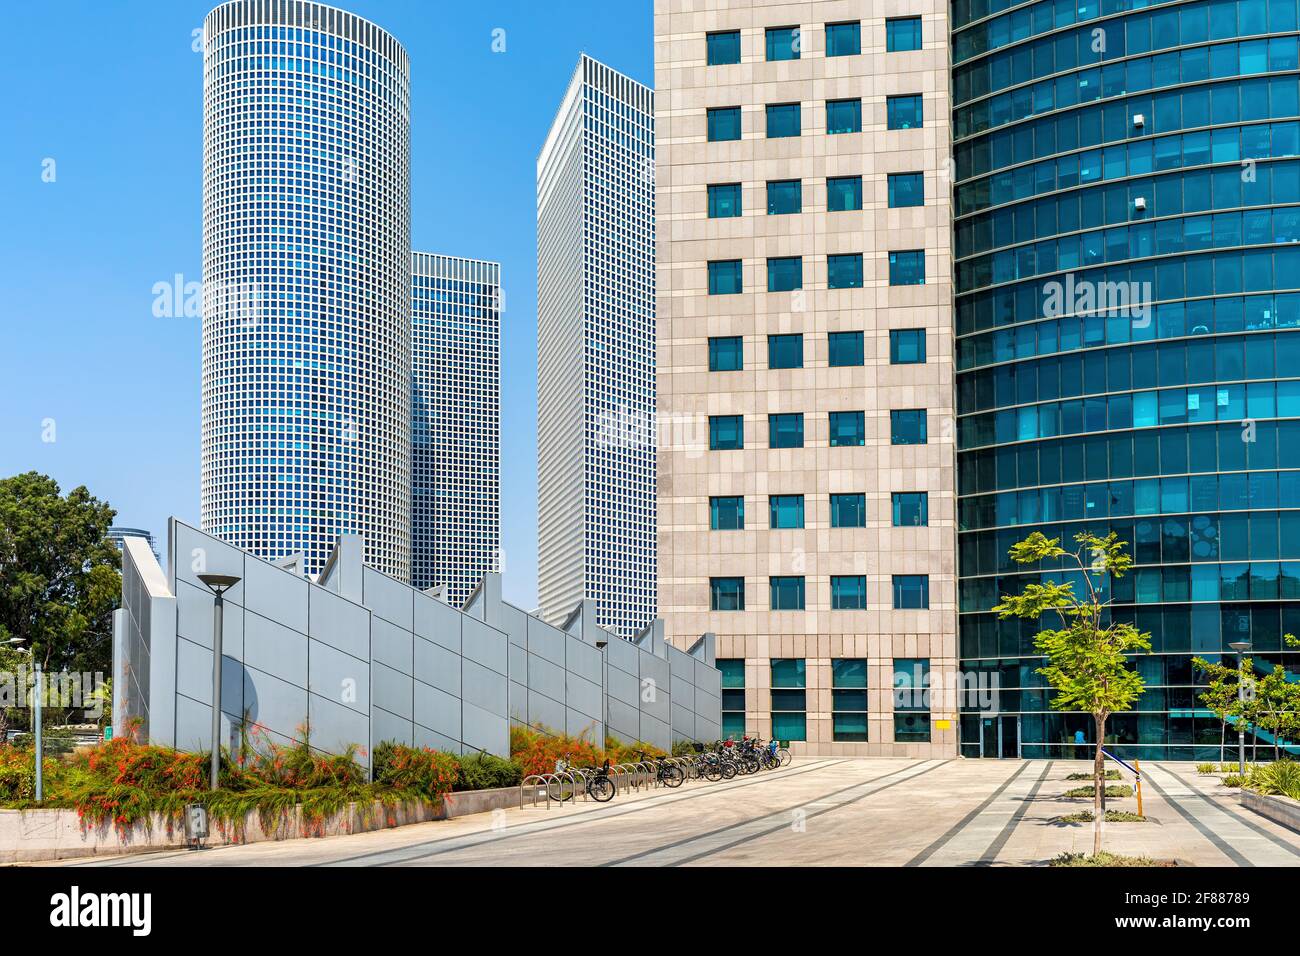 Azrieli Center High Resolution Stock Photography and Images - Alamy